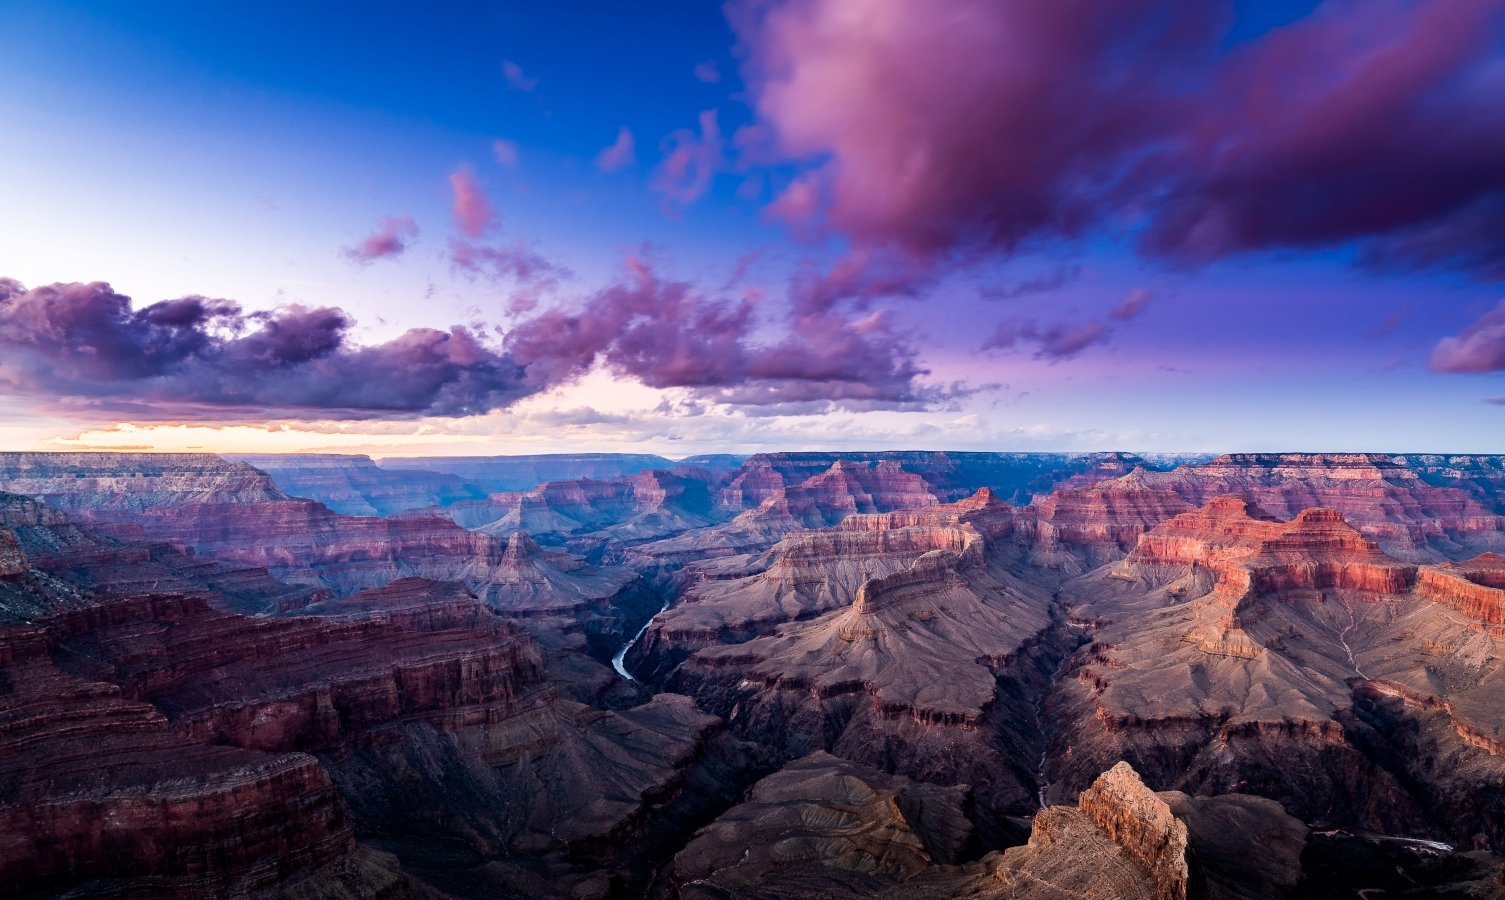 Sweeping view of the Grand Canyon at dusk.